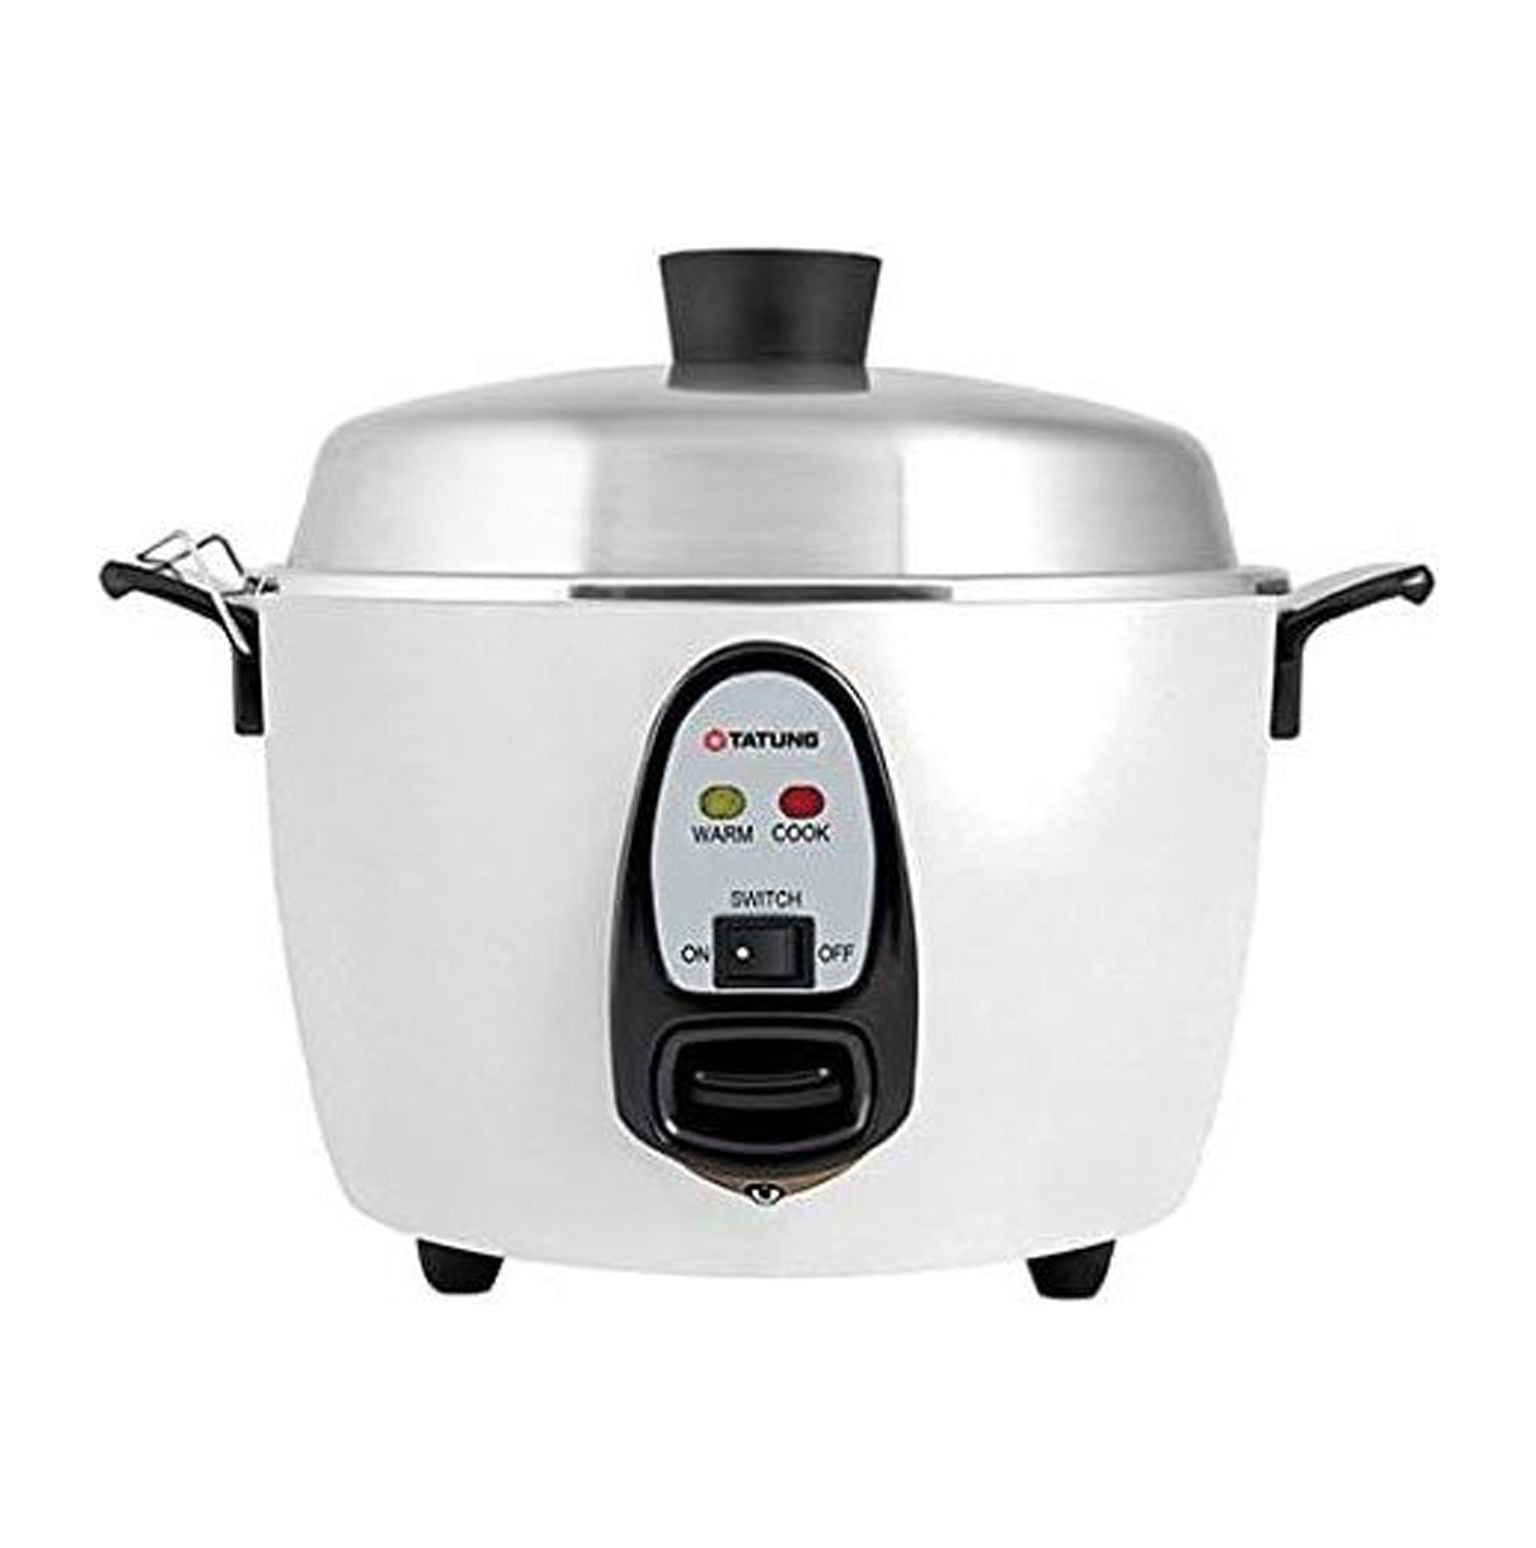 How to use a tatung rice cooker - Quora